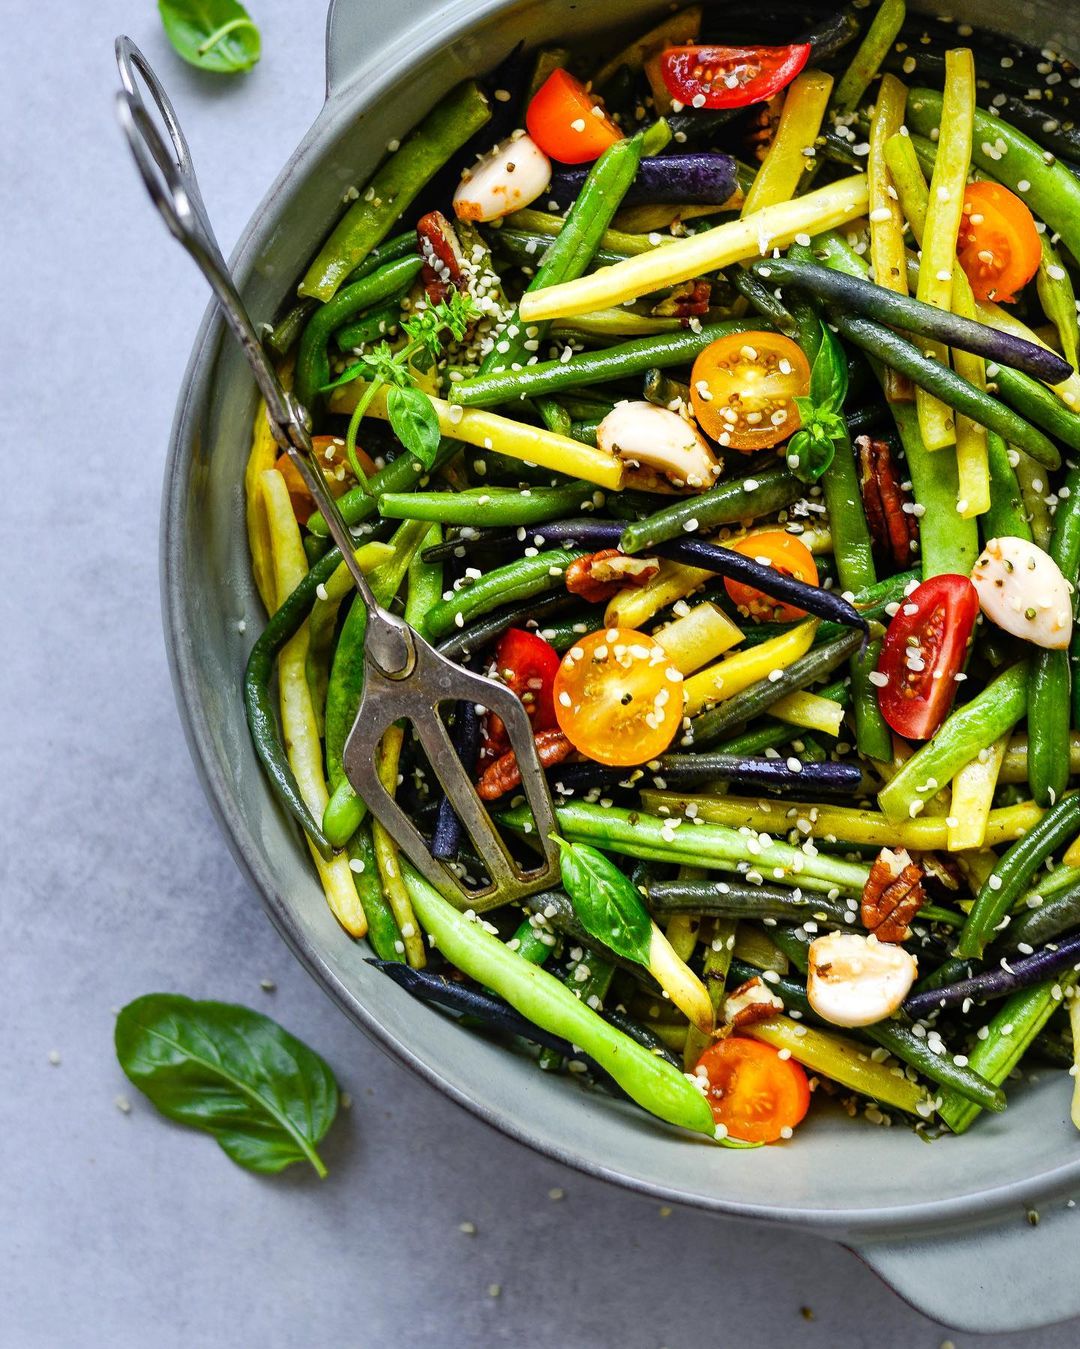 Colourful French Beans-Pecans Salad with Cherry Tomatoes,basil, Antipasti Garlic & Hemp Seeds